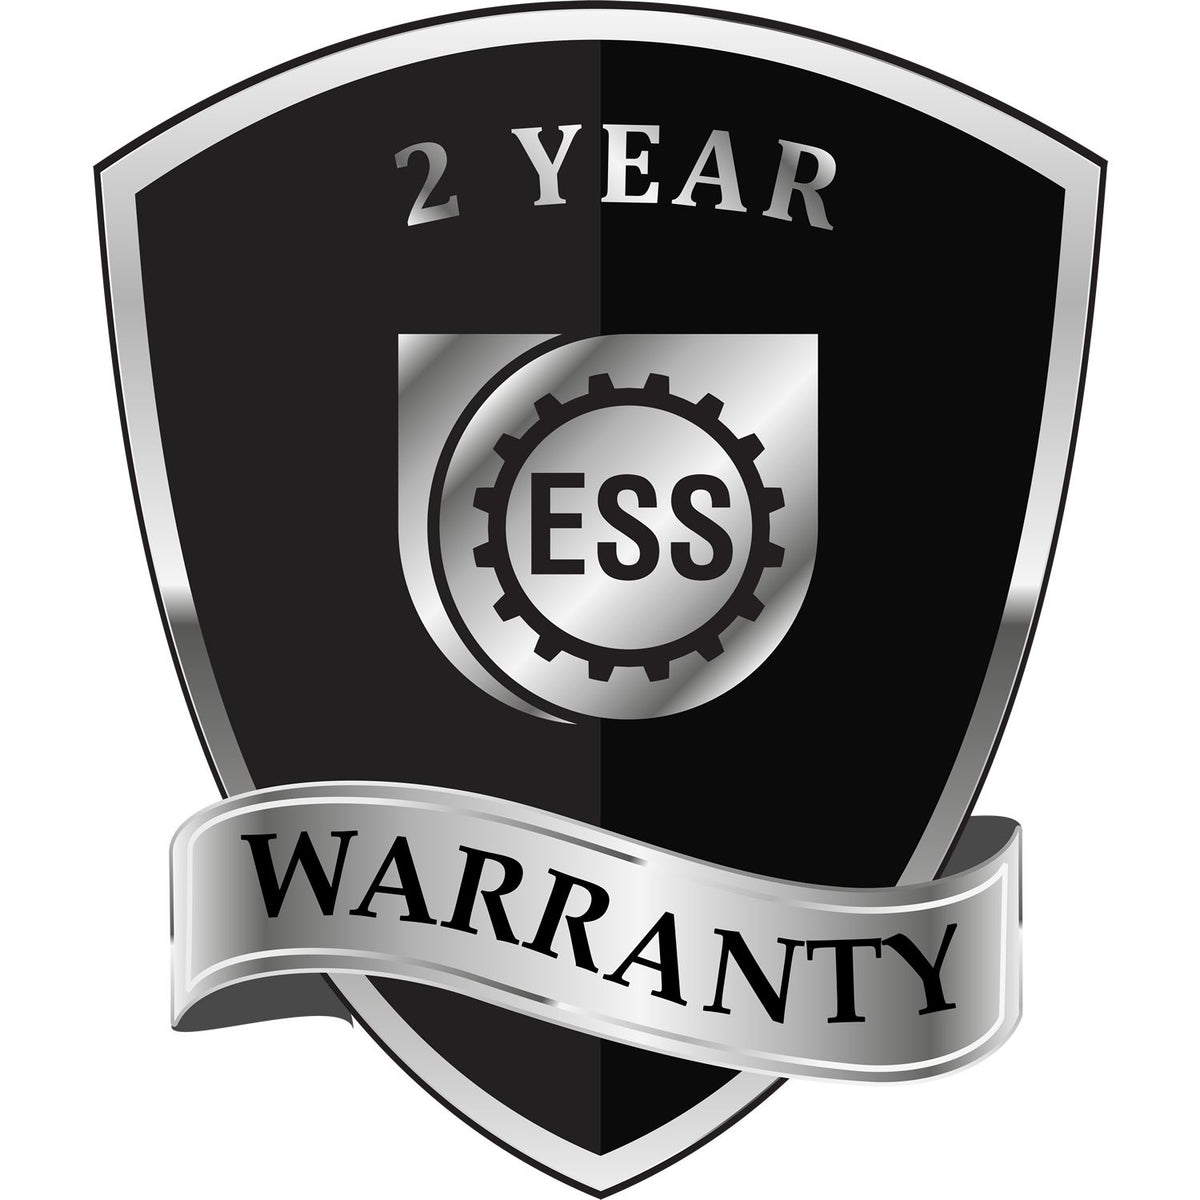 A black and silver badge or emblem showing warranty information for the Heavy Duty Cast Iron Utah Geologist Seal Embosser